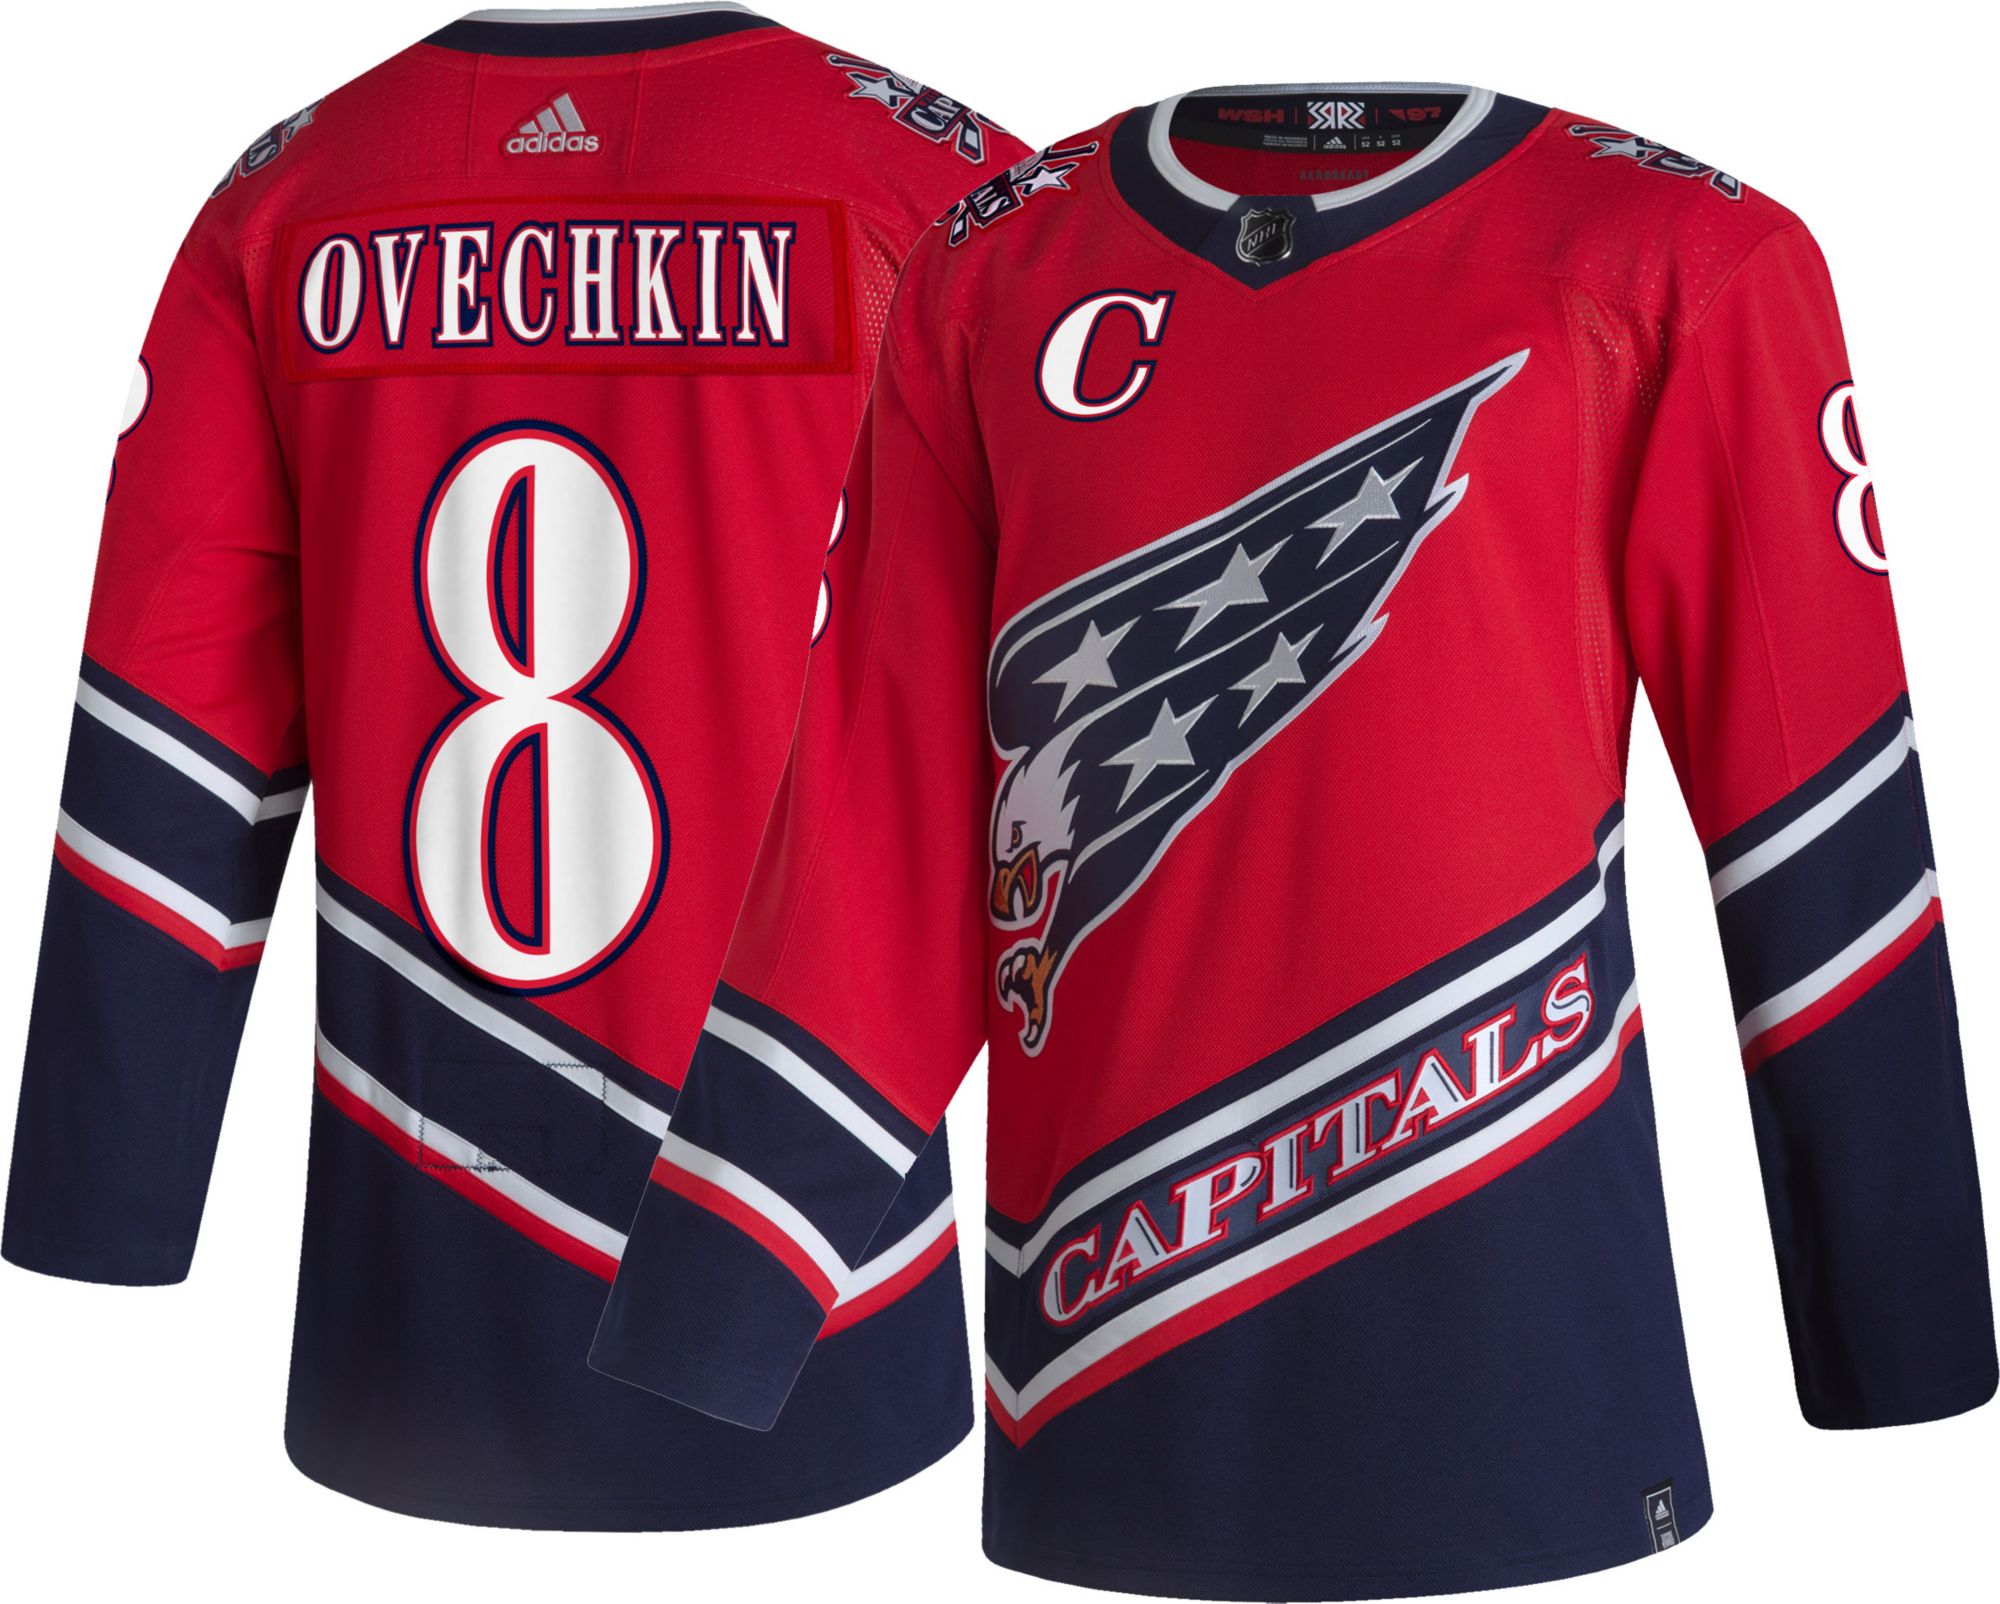 capitals throwback jersey